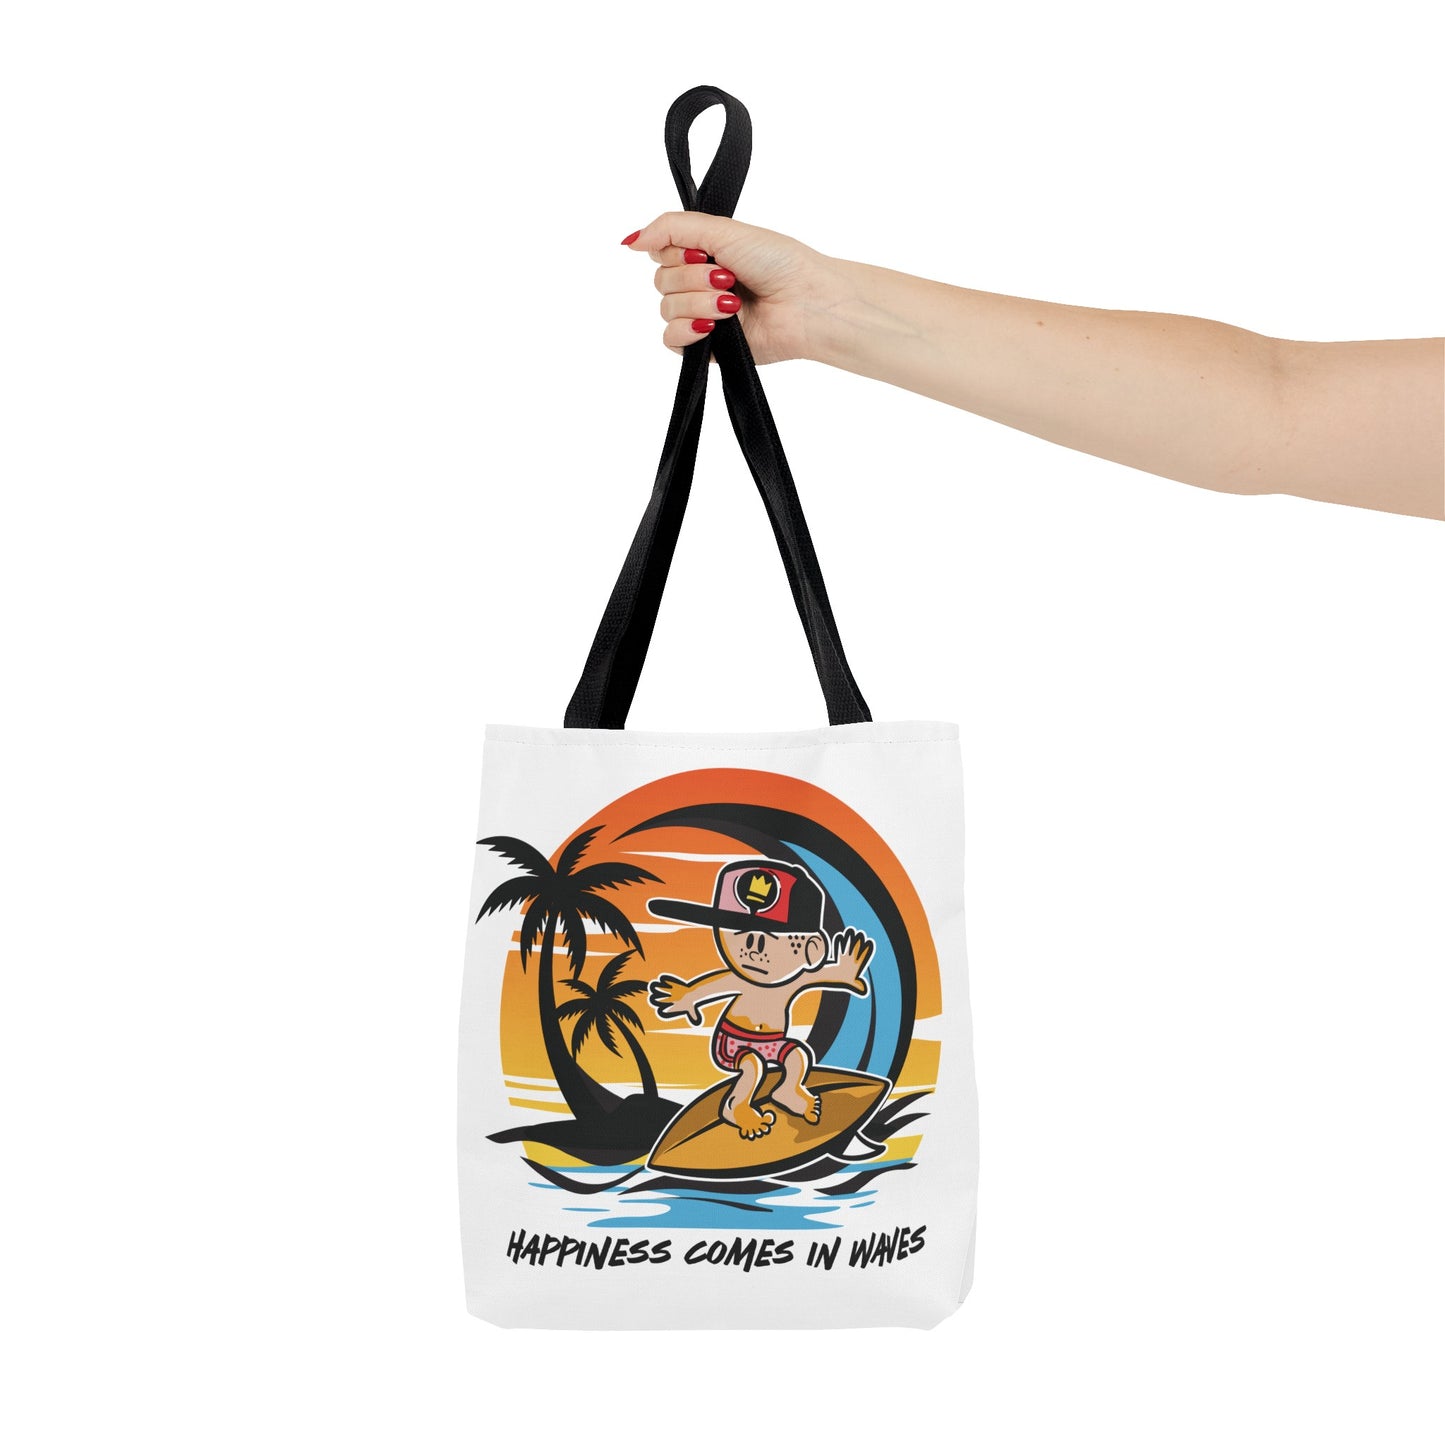 HAPPINESS COMES IN WAVES TOTE BAG